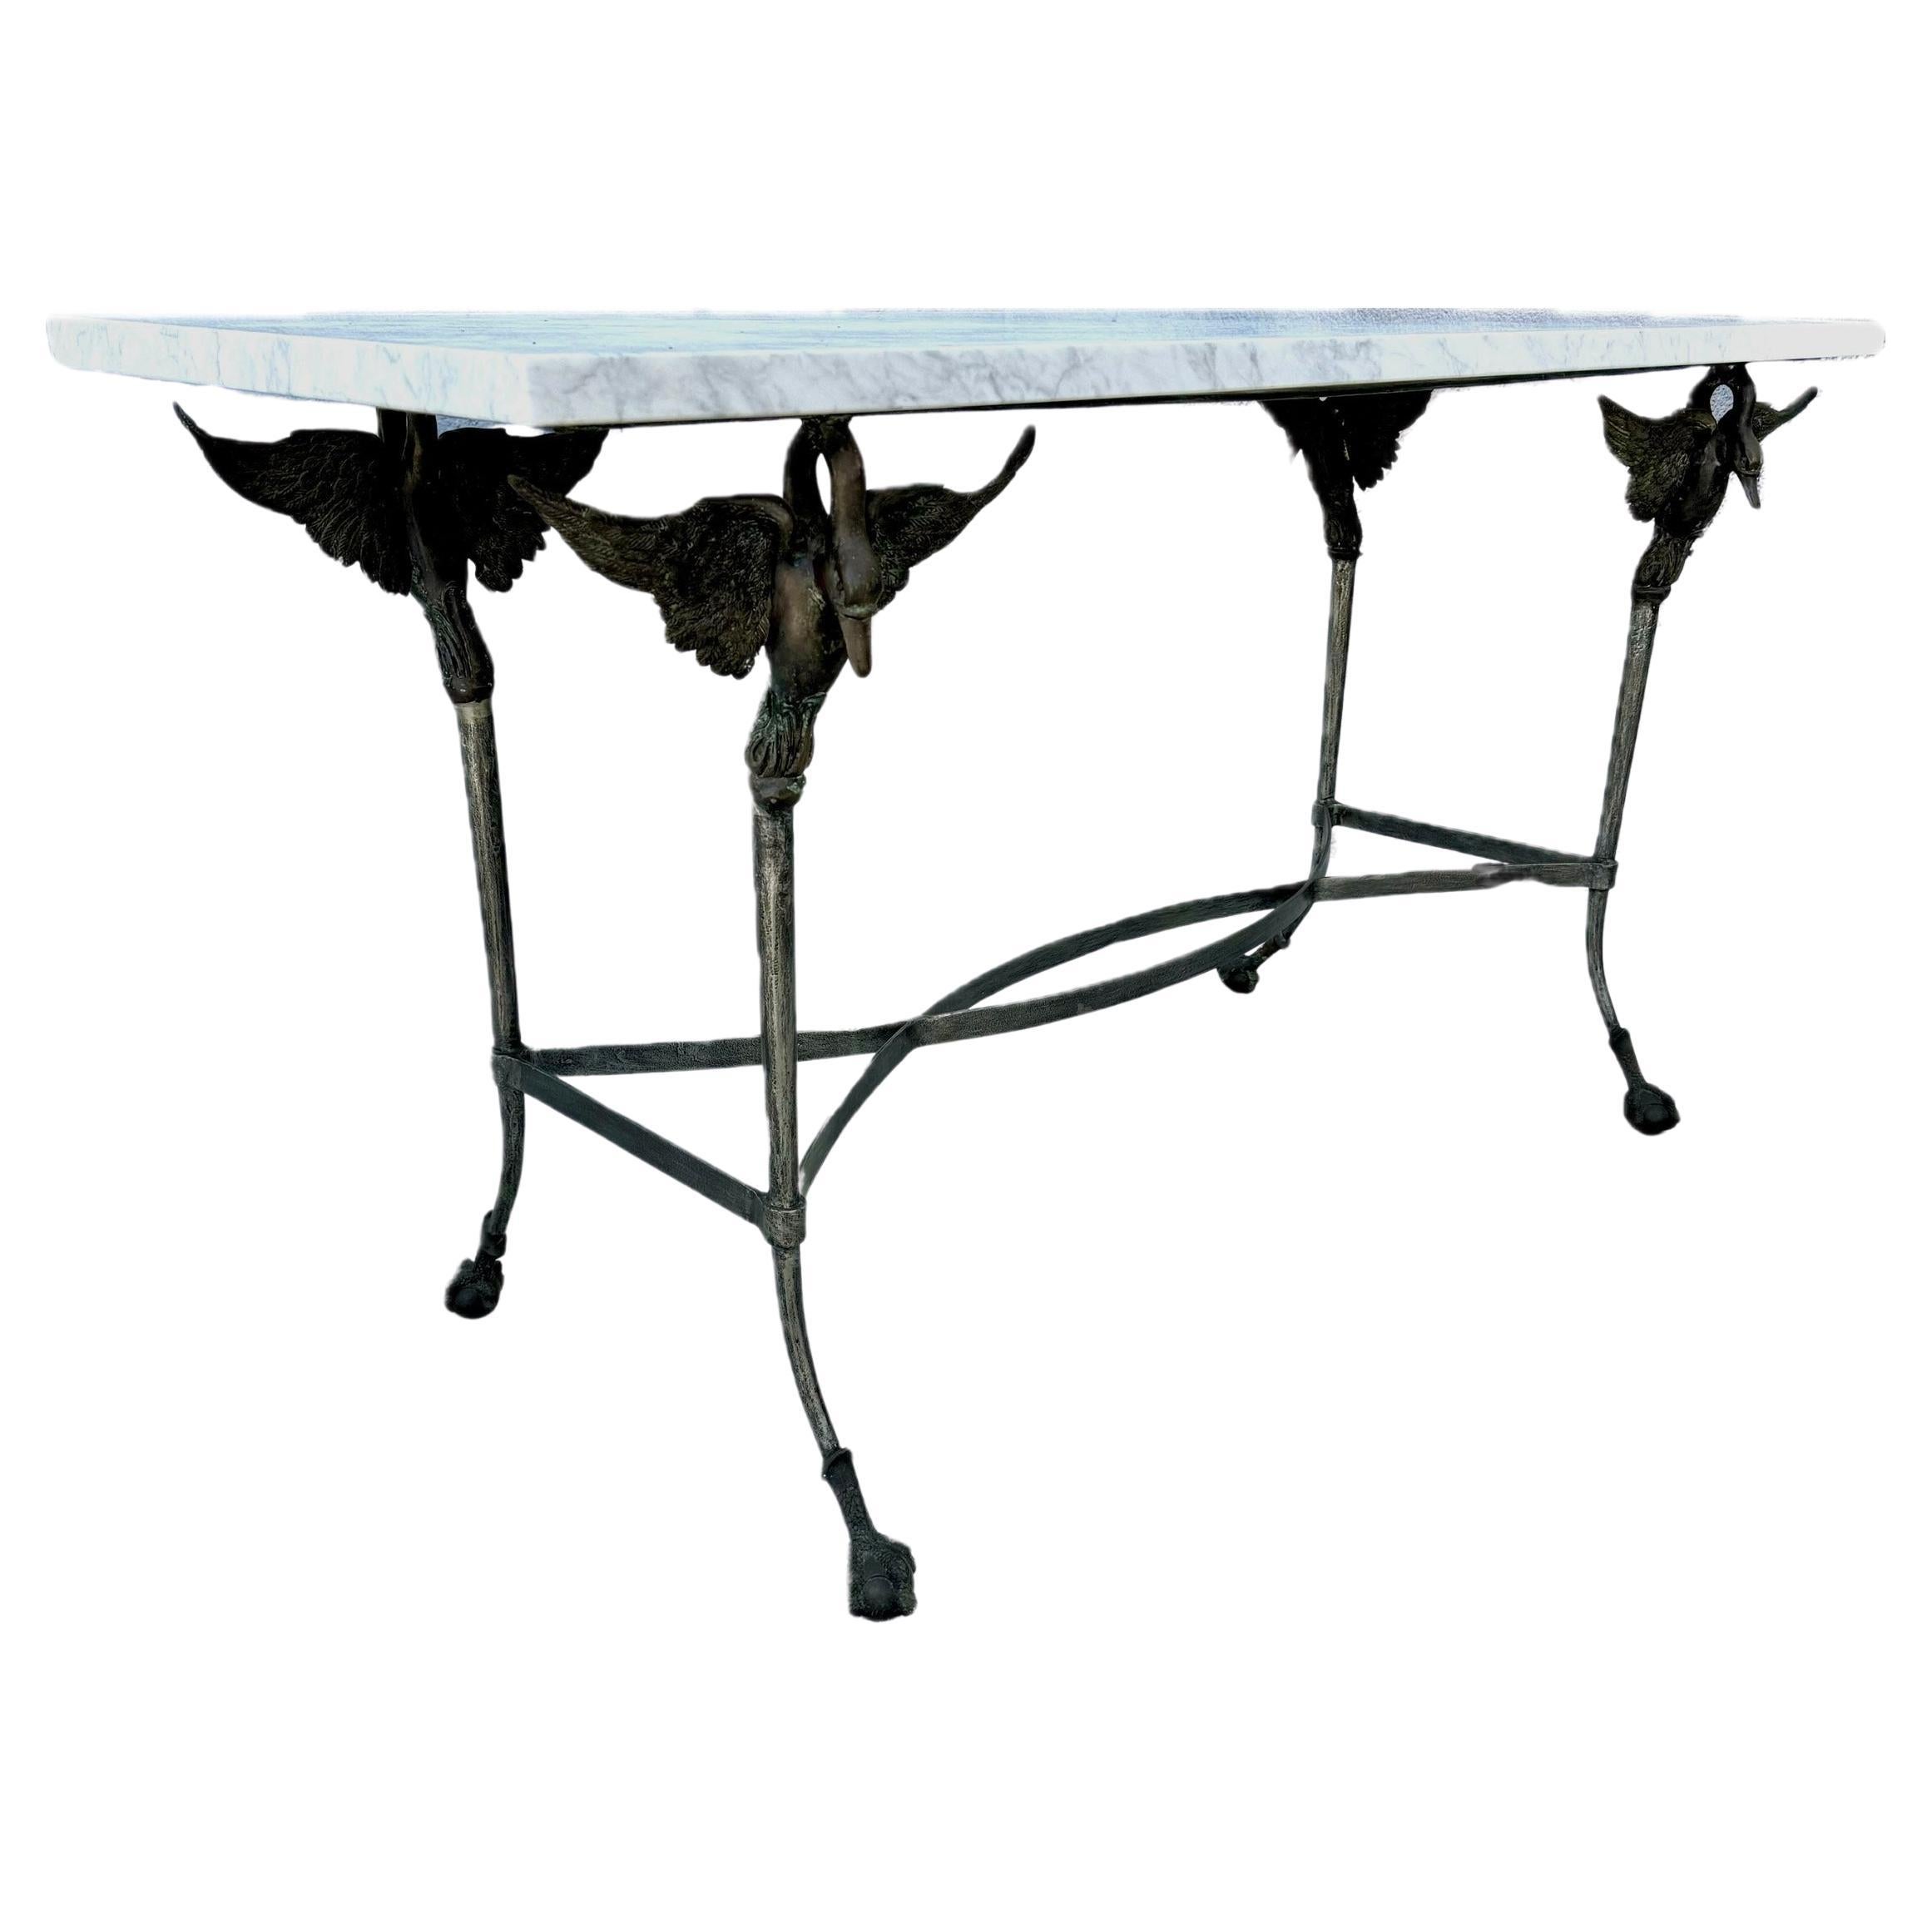 French Carrara Marble Top Steel Table With Bronze Swans